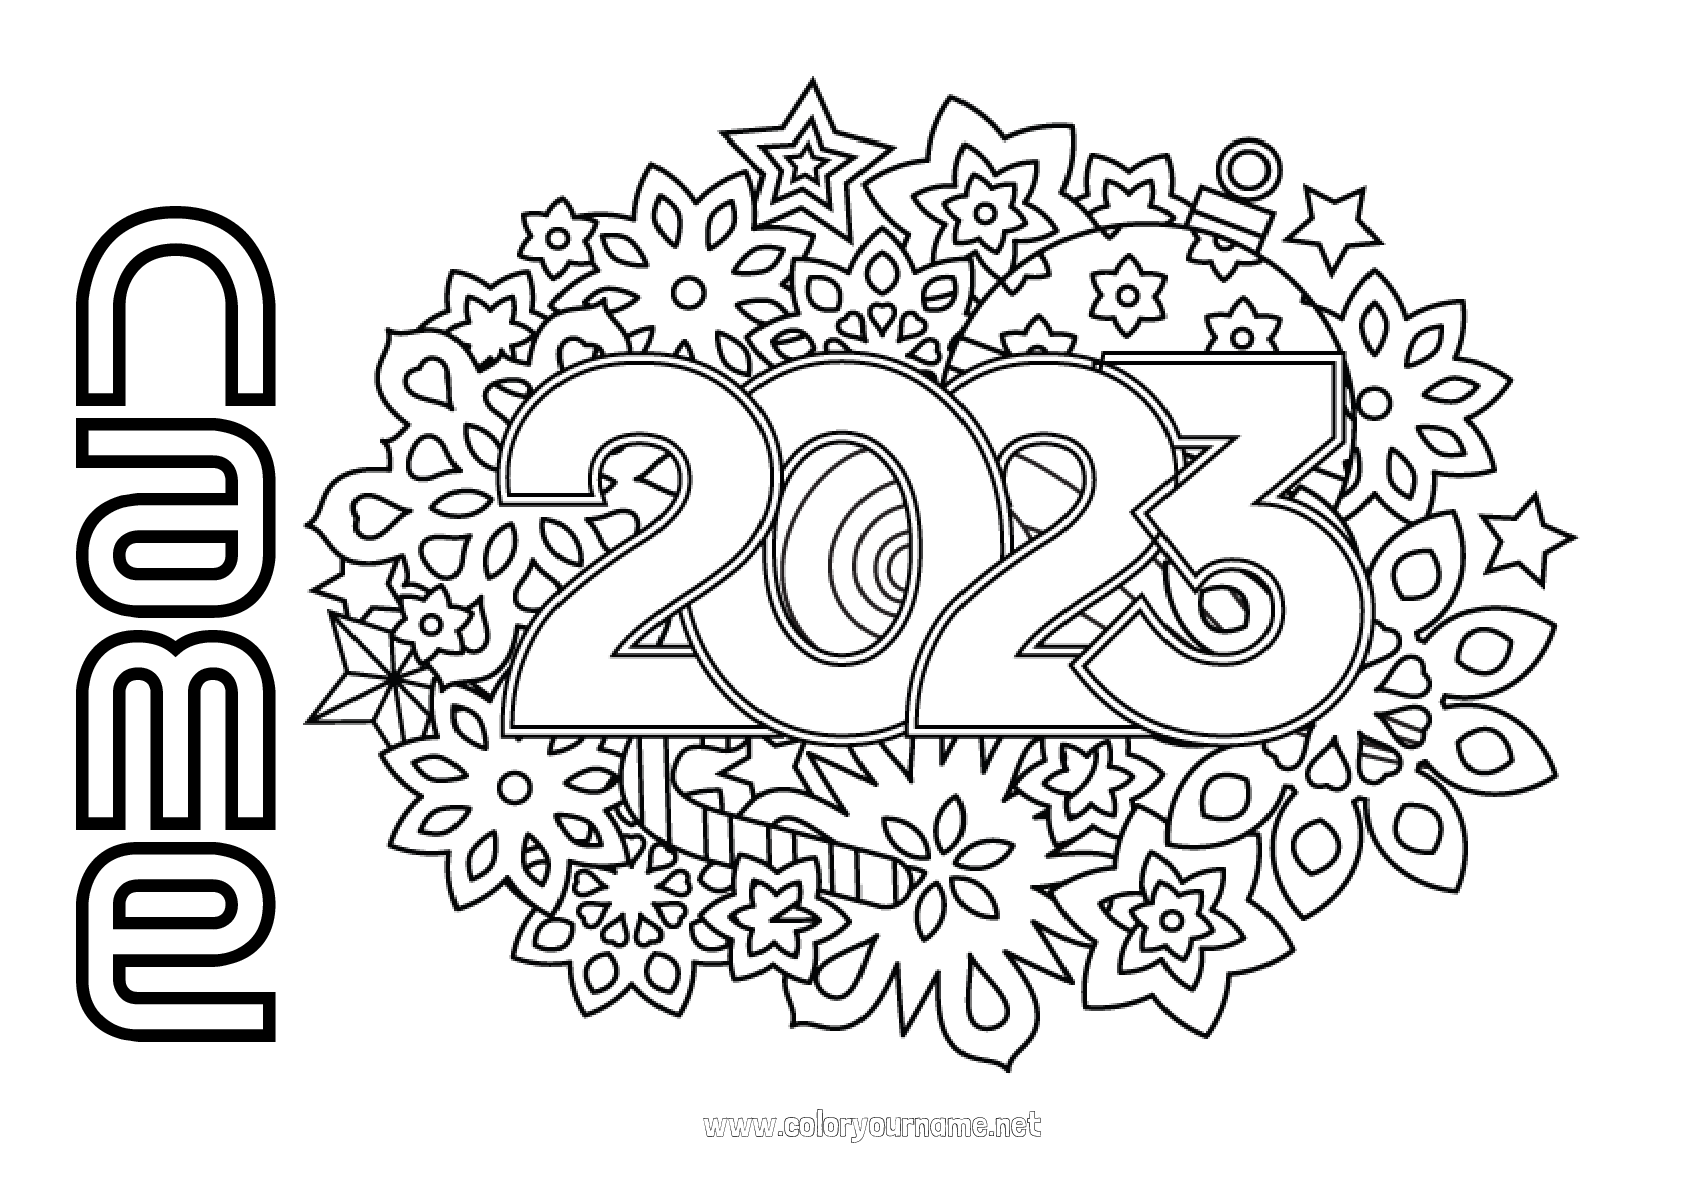 Coloring page No.431 Happy new year